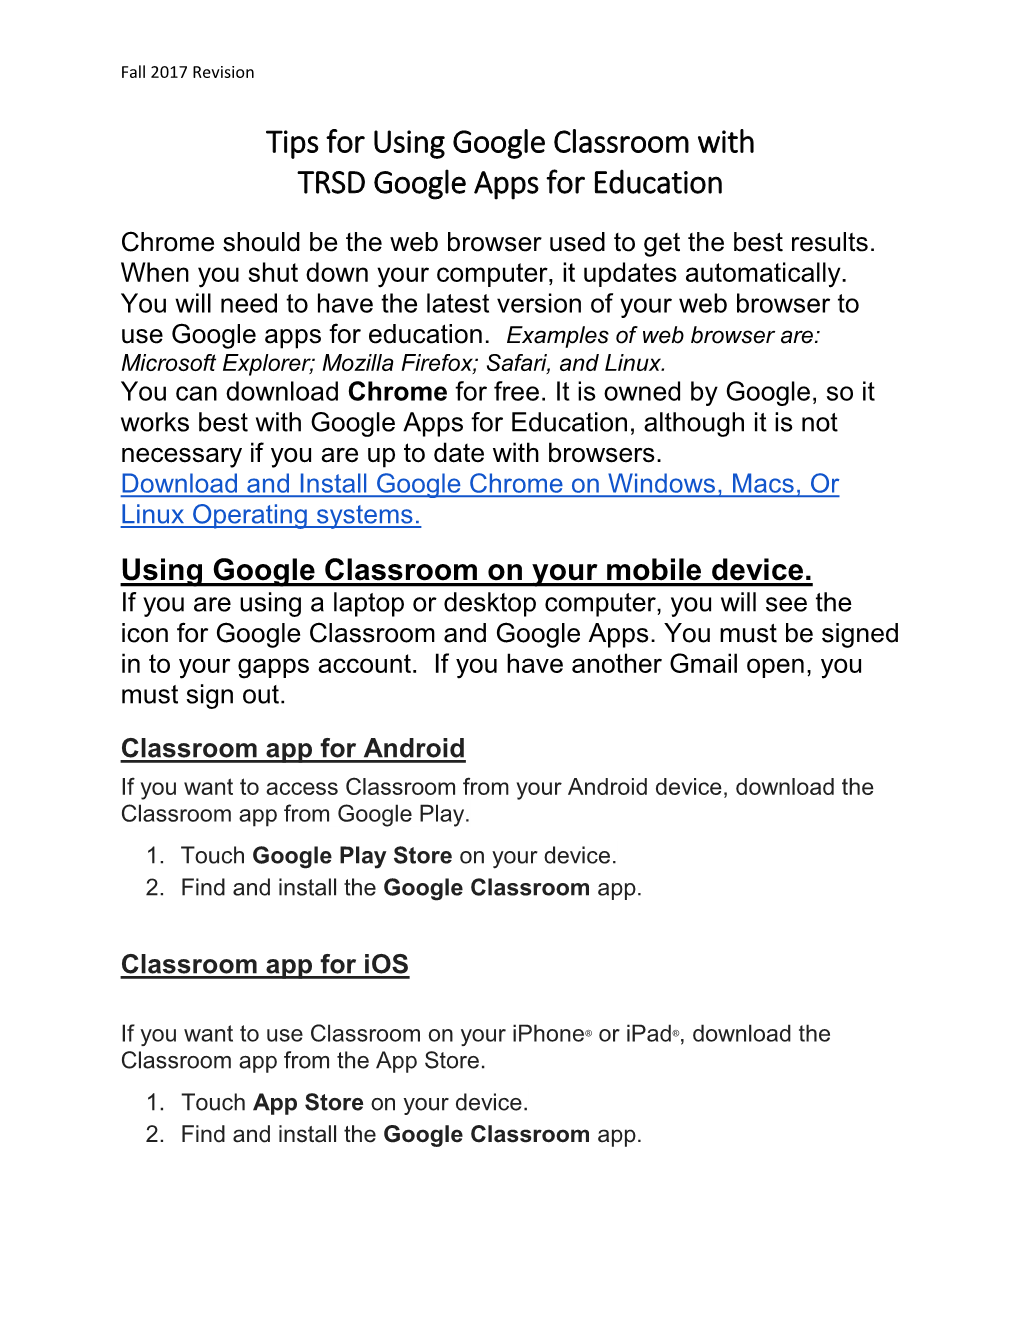 Tips for Using Google Classroom with TRSD Google Apps for Education